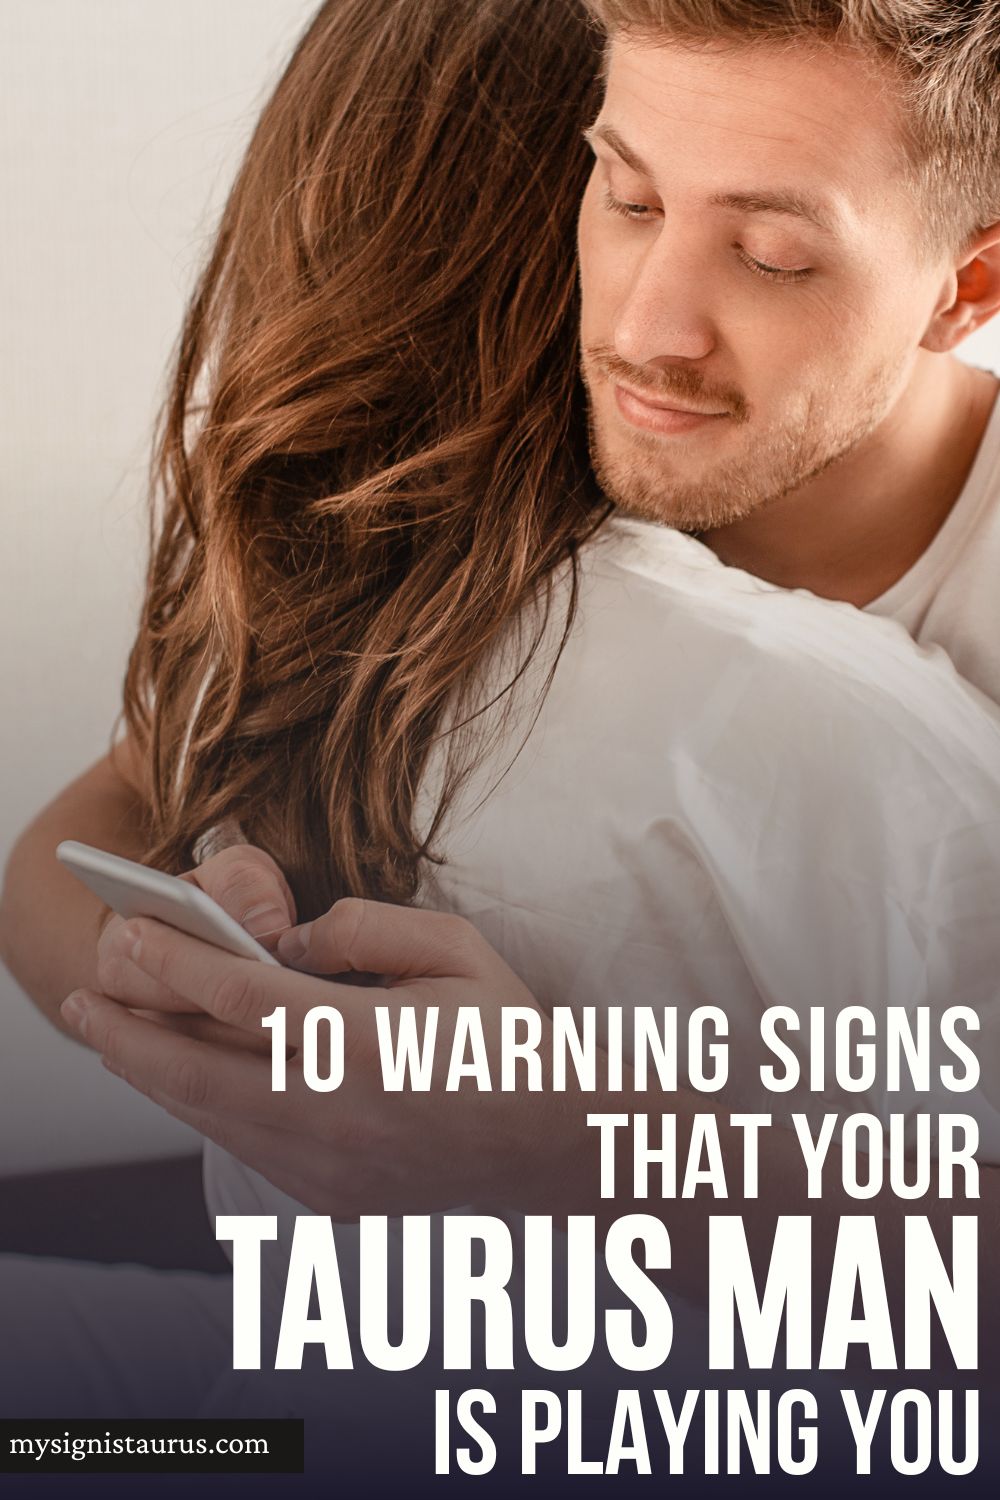 Warning Signs That Your Taurus Man Is Playing You